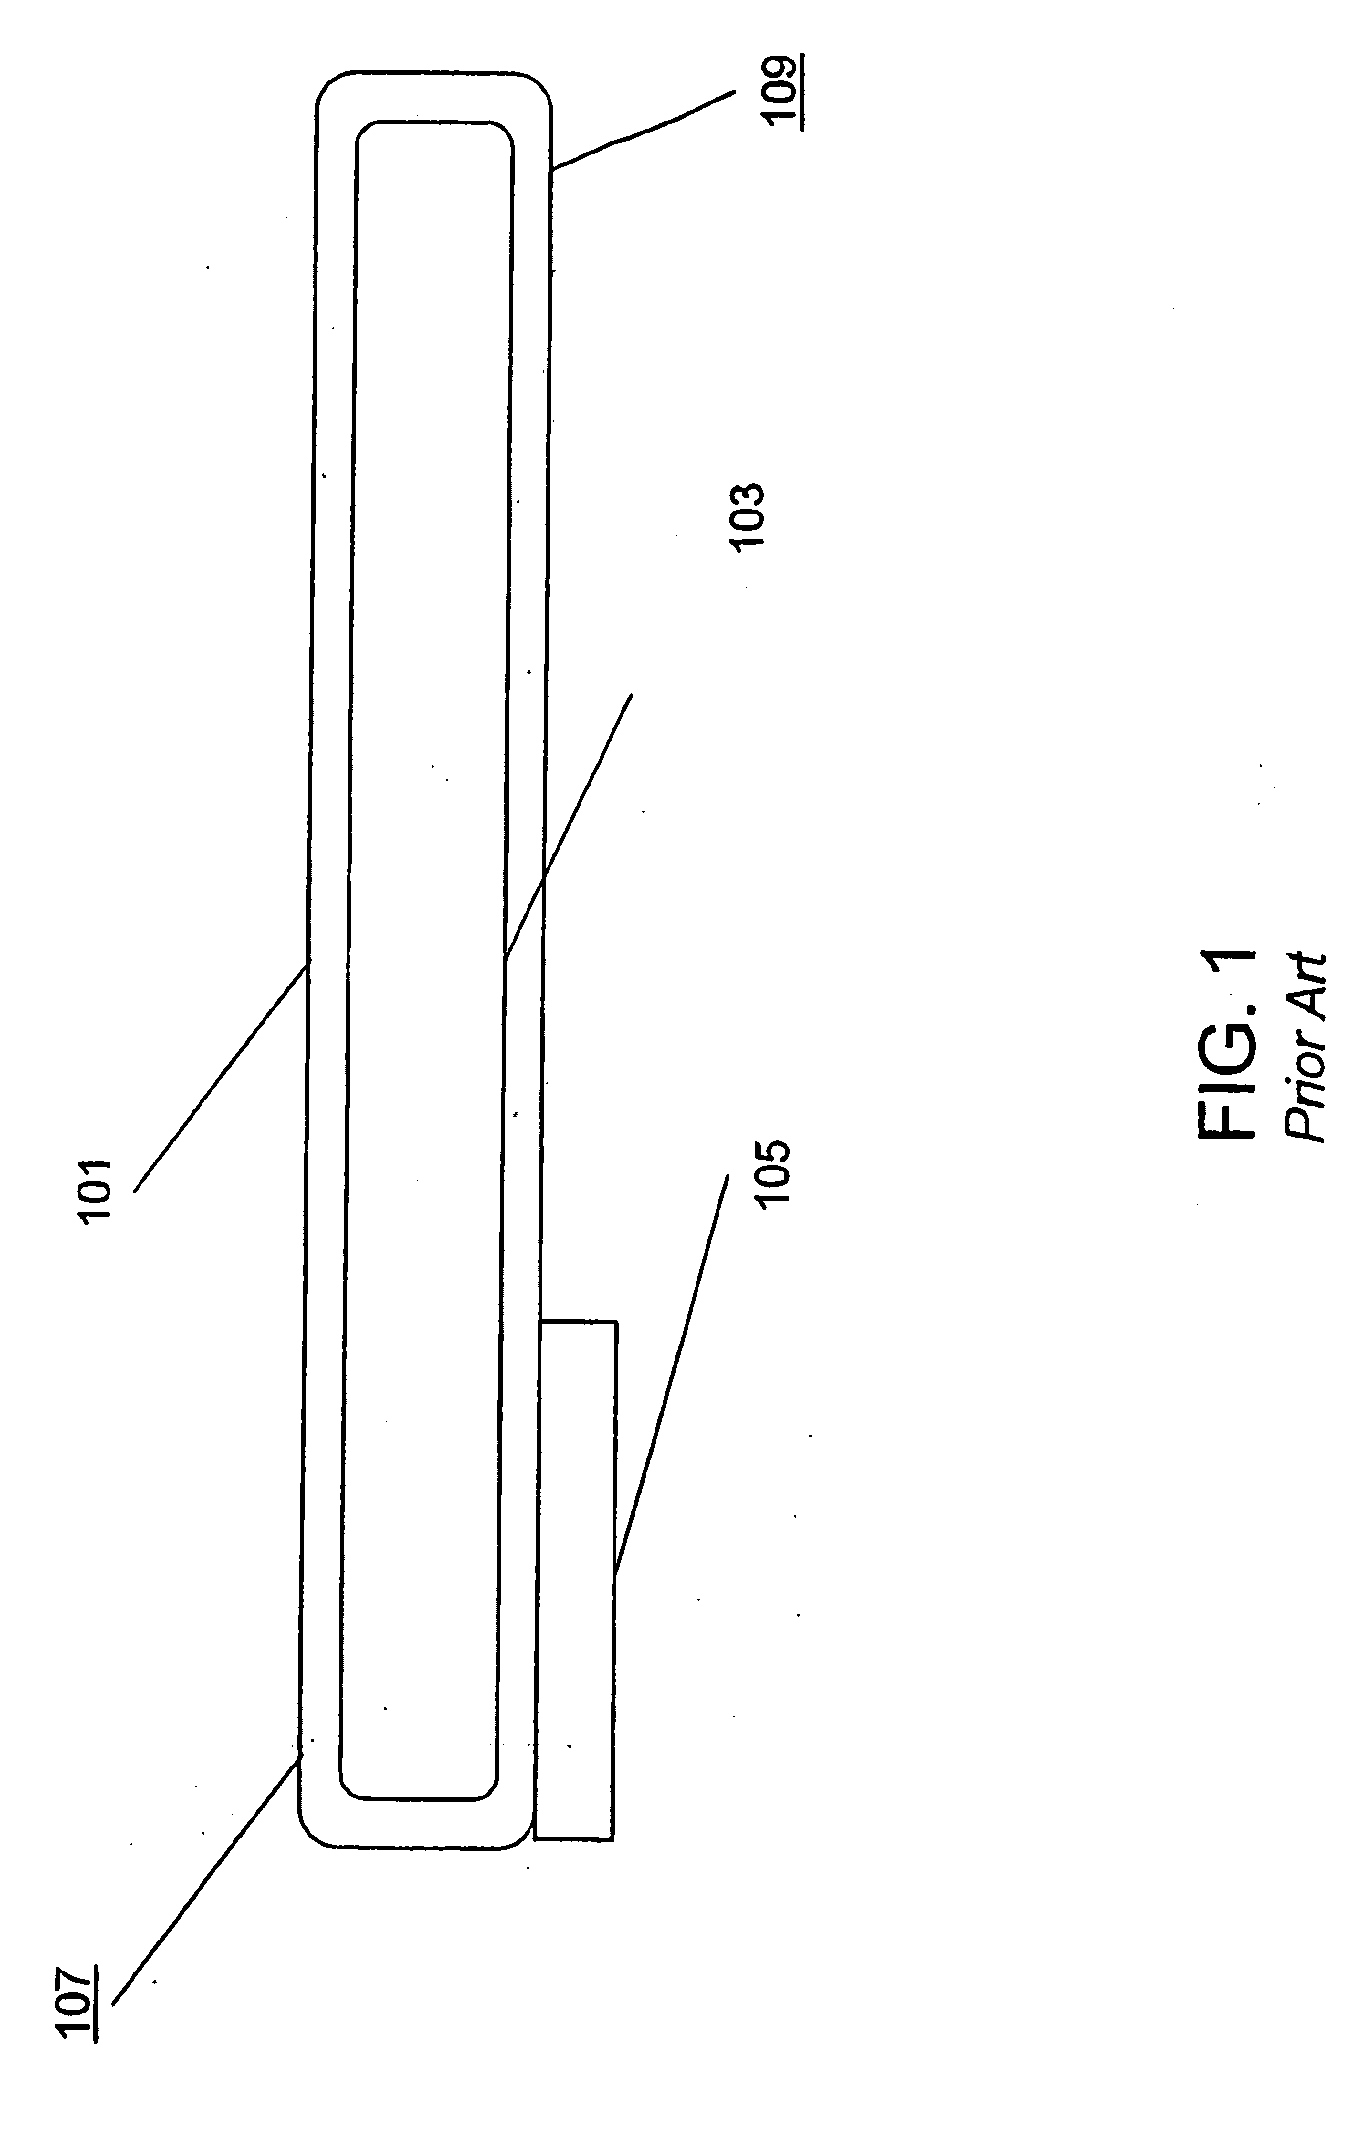 Cooling of High Power Density Devices Using Electrically Conducting Fluids